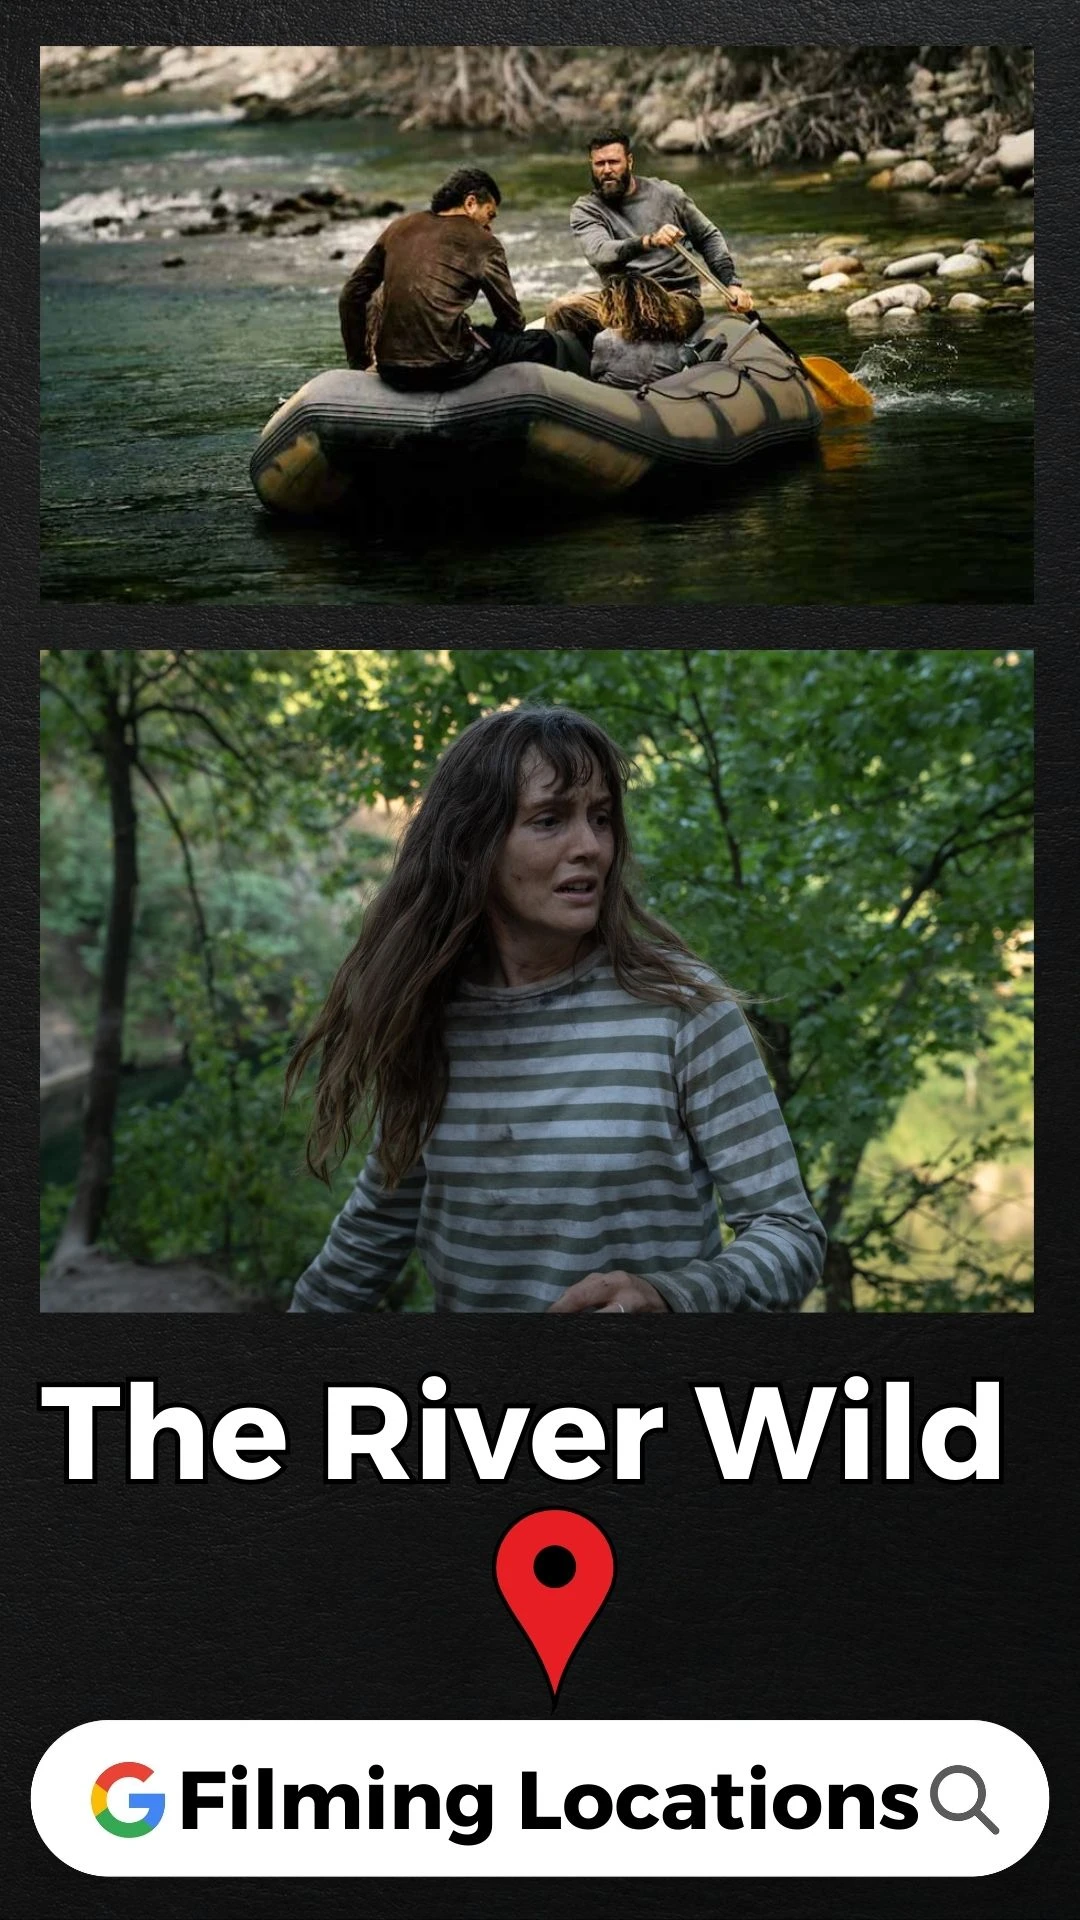 The River Wild Filming Locations